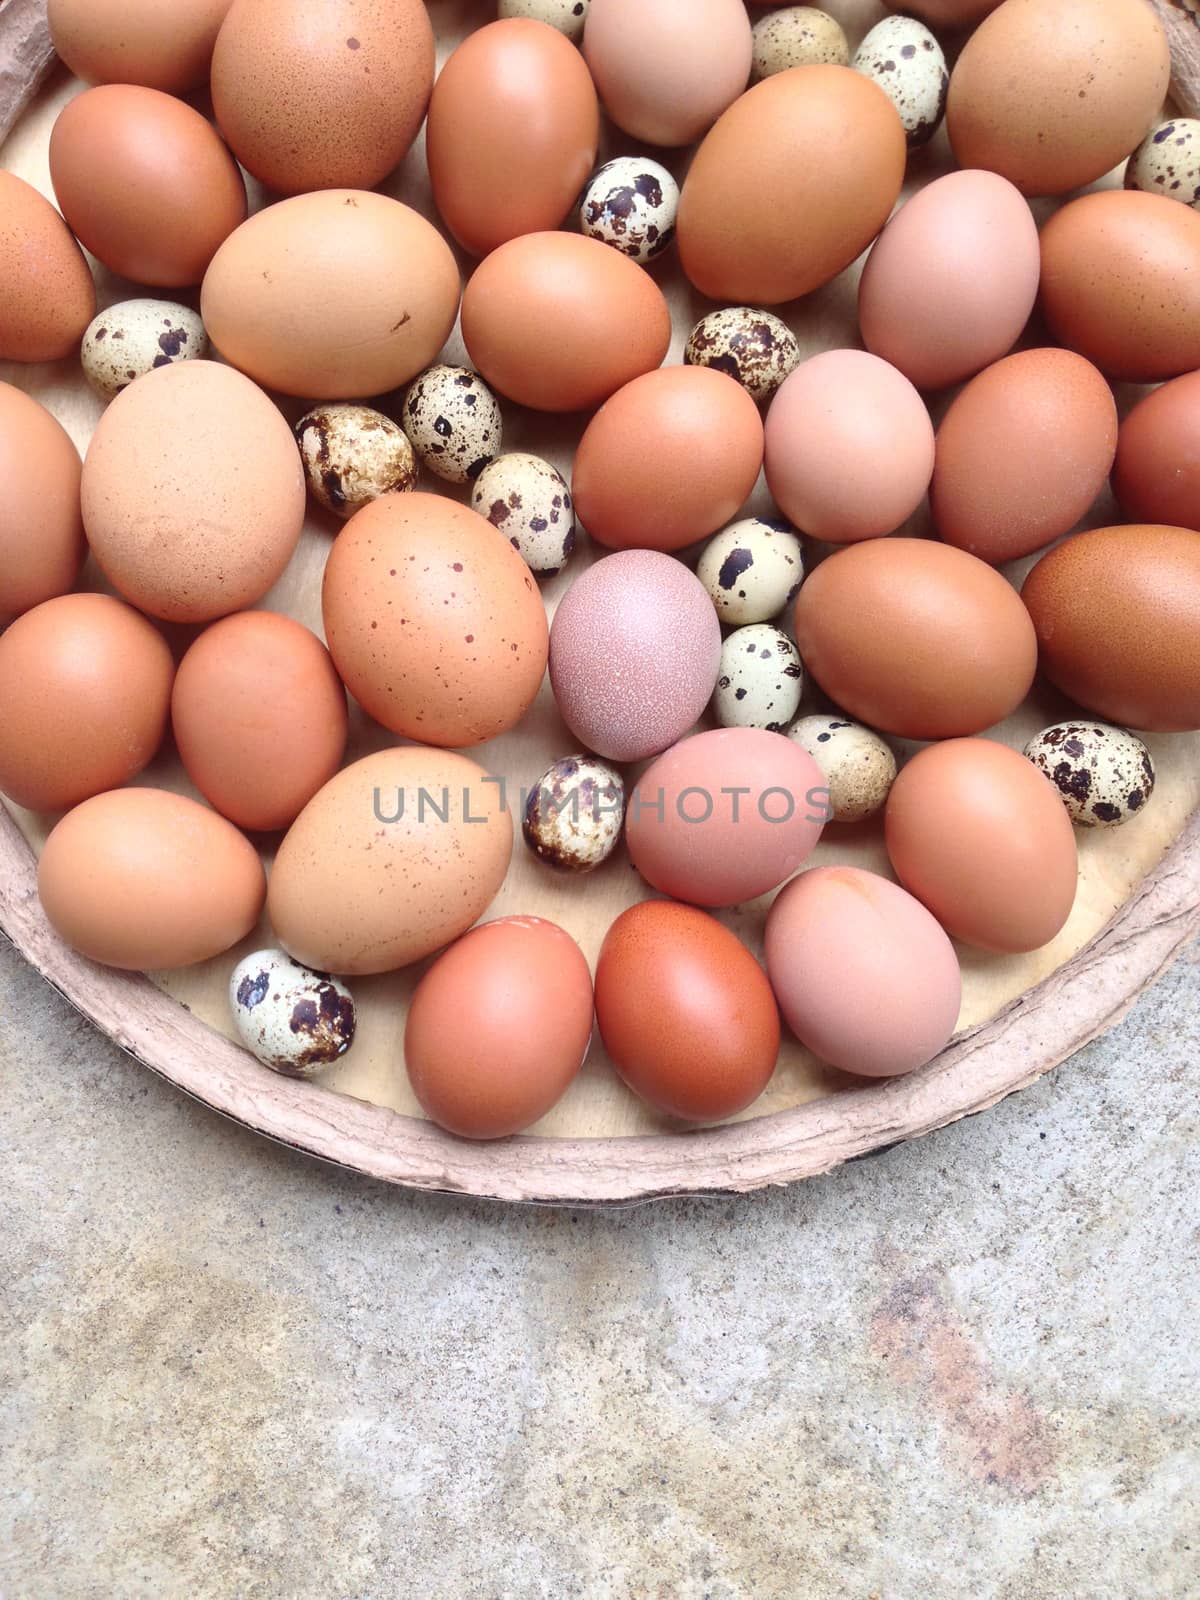 Chicken eggs and Quail eggs in wooden plate on cement background